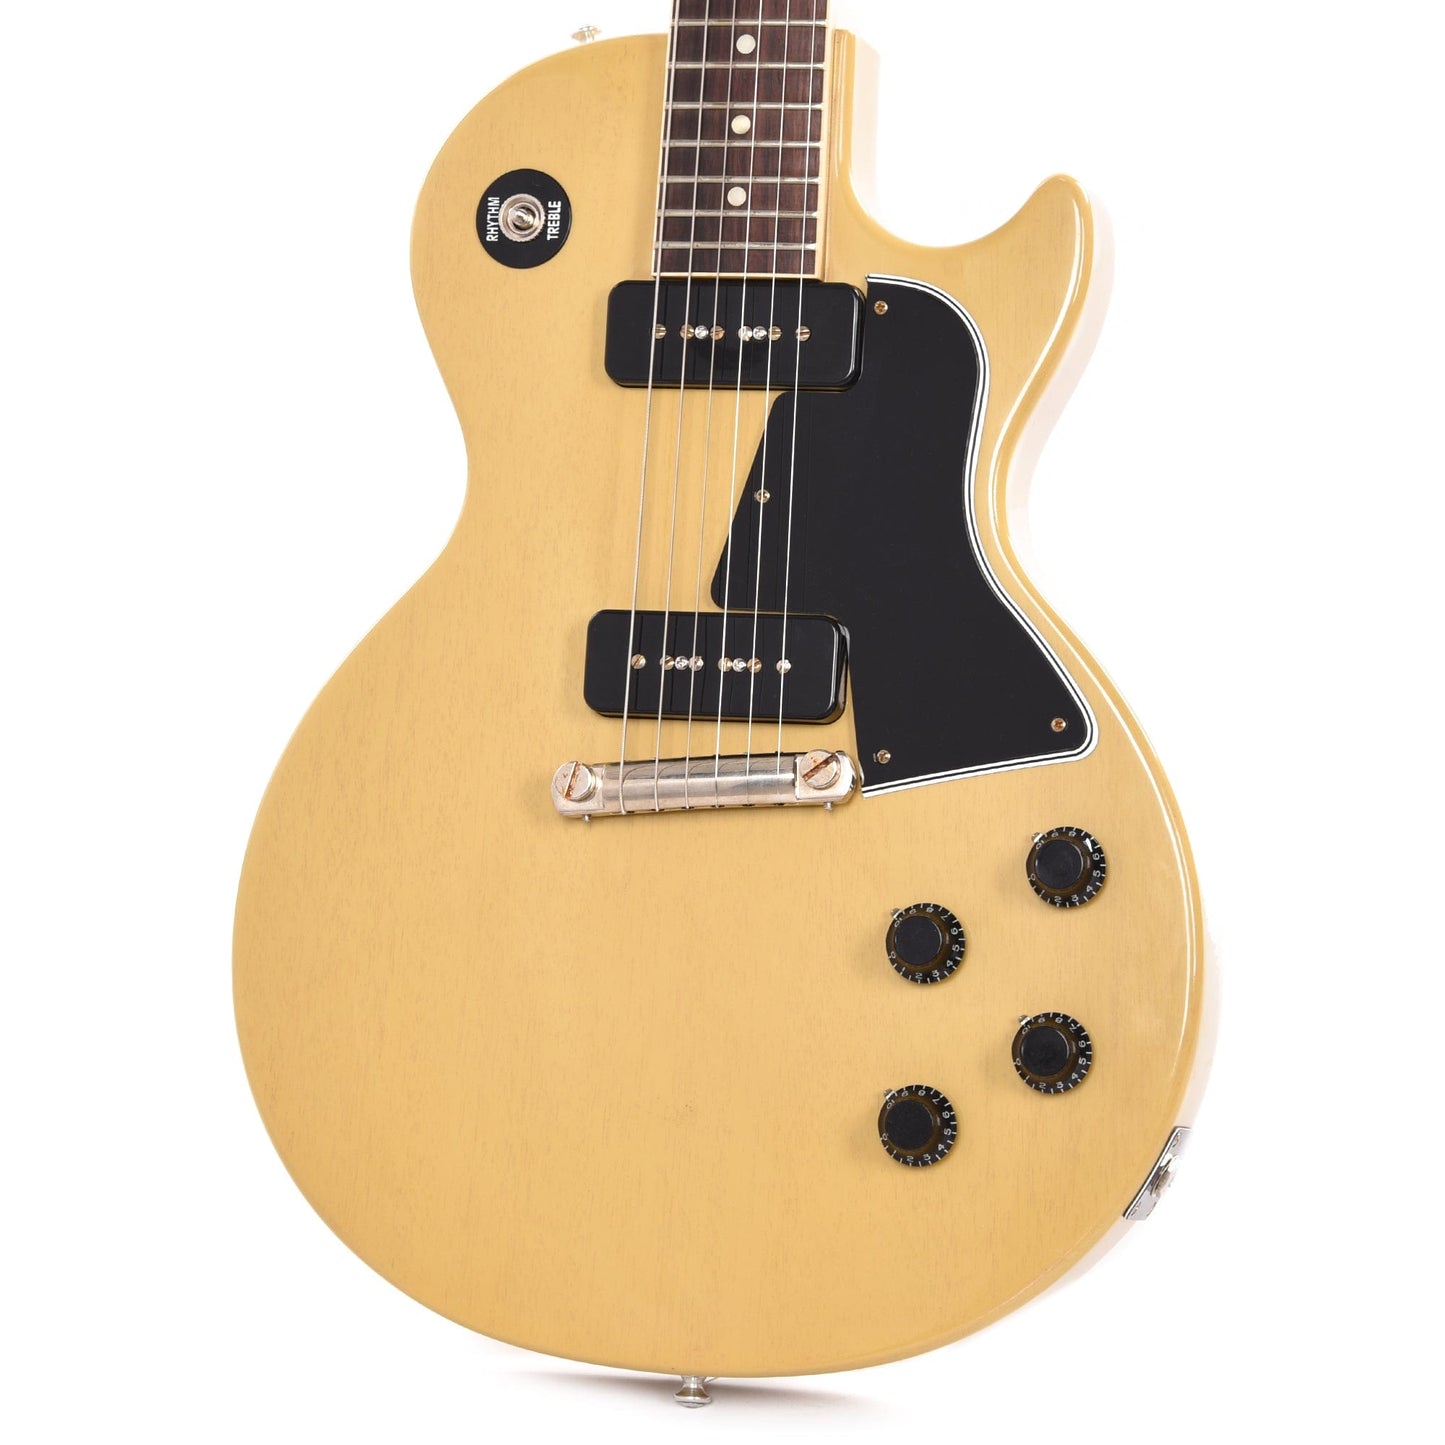 Gibson Custom Shop 1957 Les Paul Special Single Cut Reissue TV Yellow VOS Electric Guitars / Solid Body